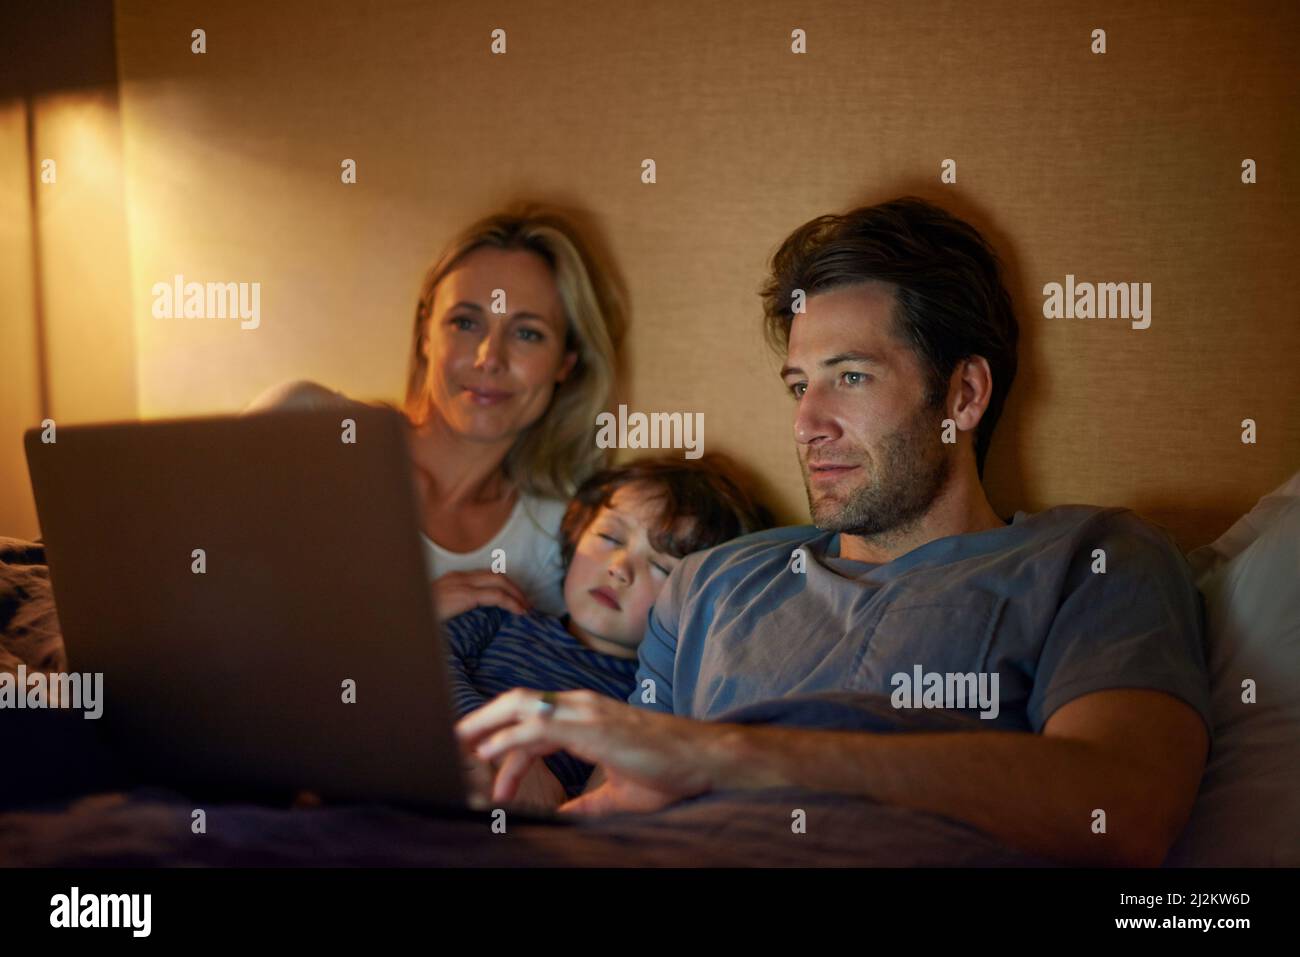 Drifting off to dreamland while watching movies. A young family lying in bed and looking at a laptop screen. Stock Photo